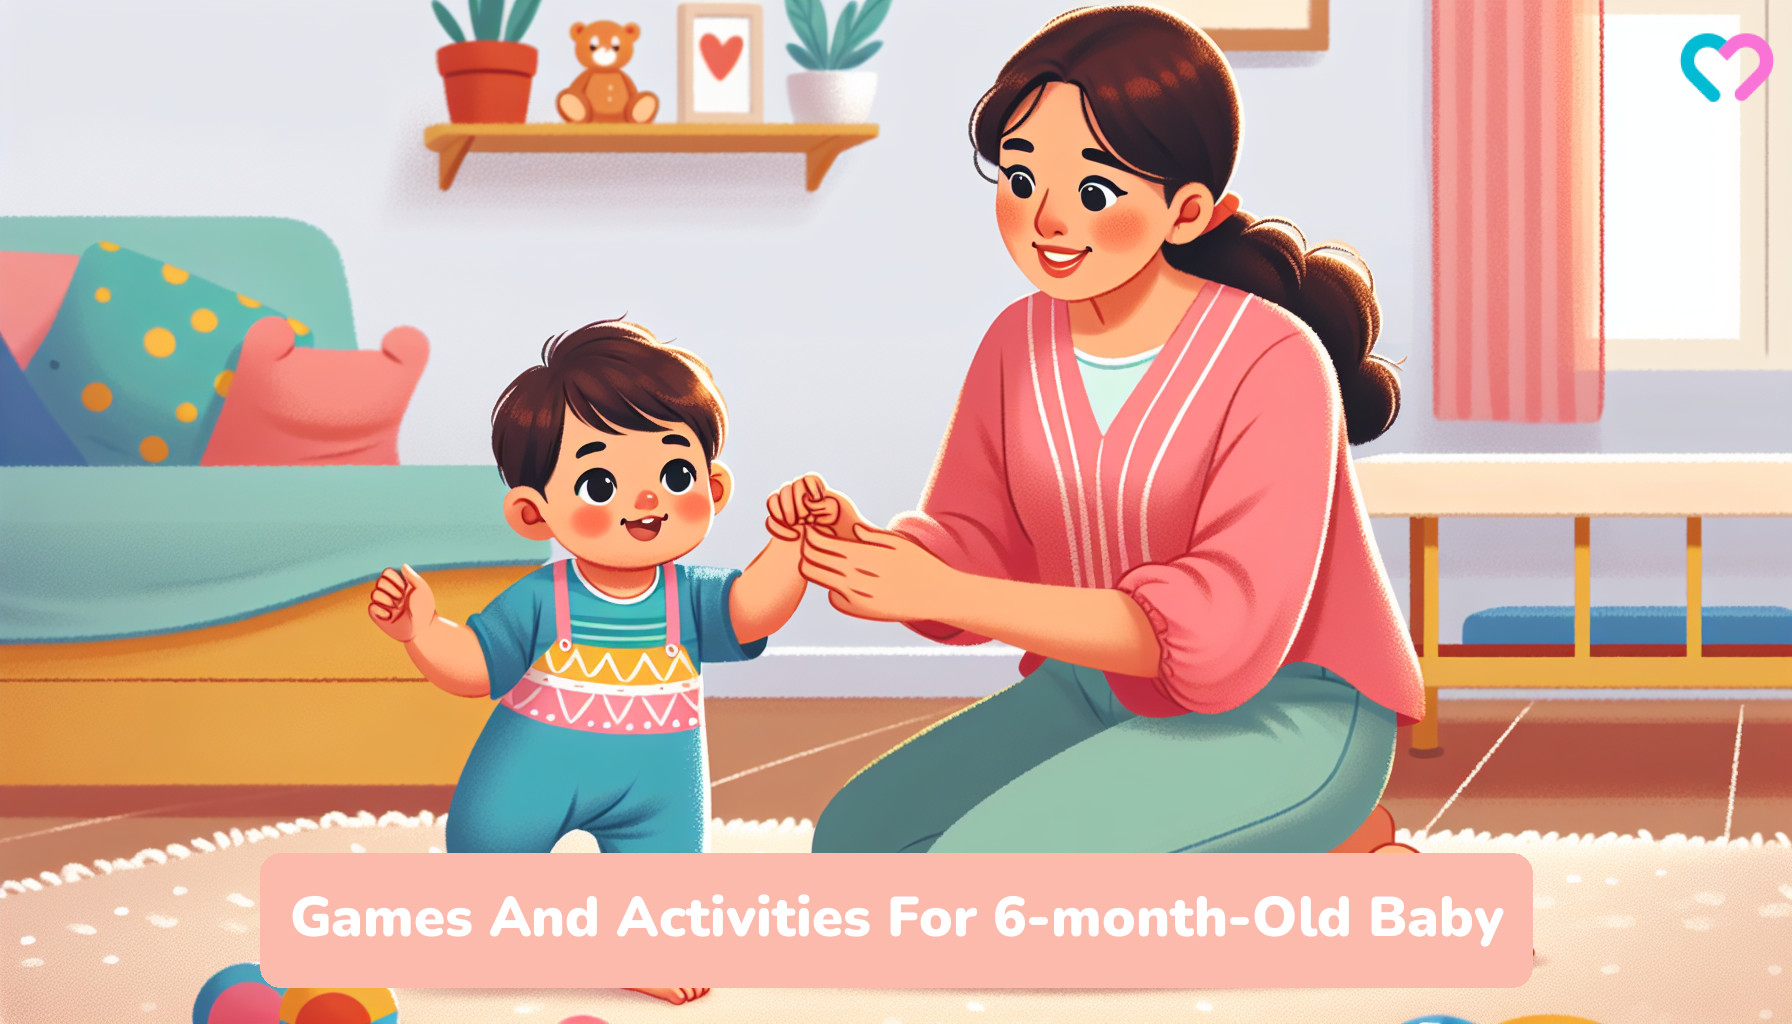 Games And Activities For 6-Month-Old Baby_illustration